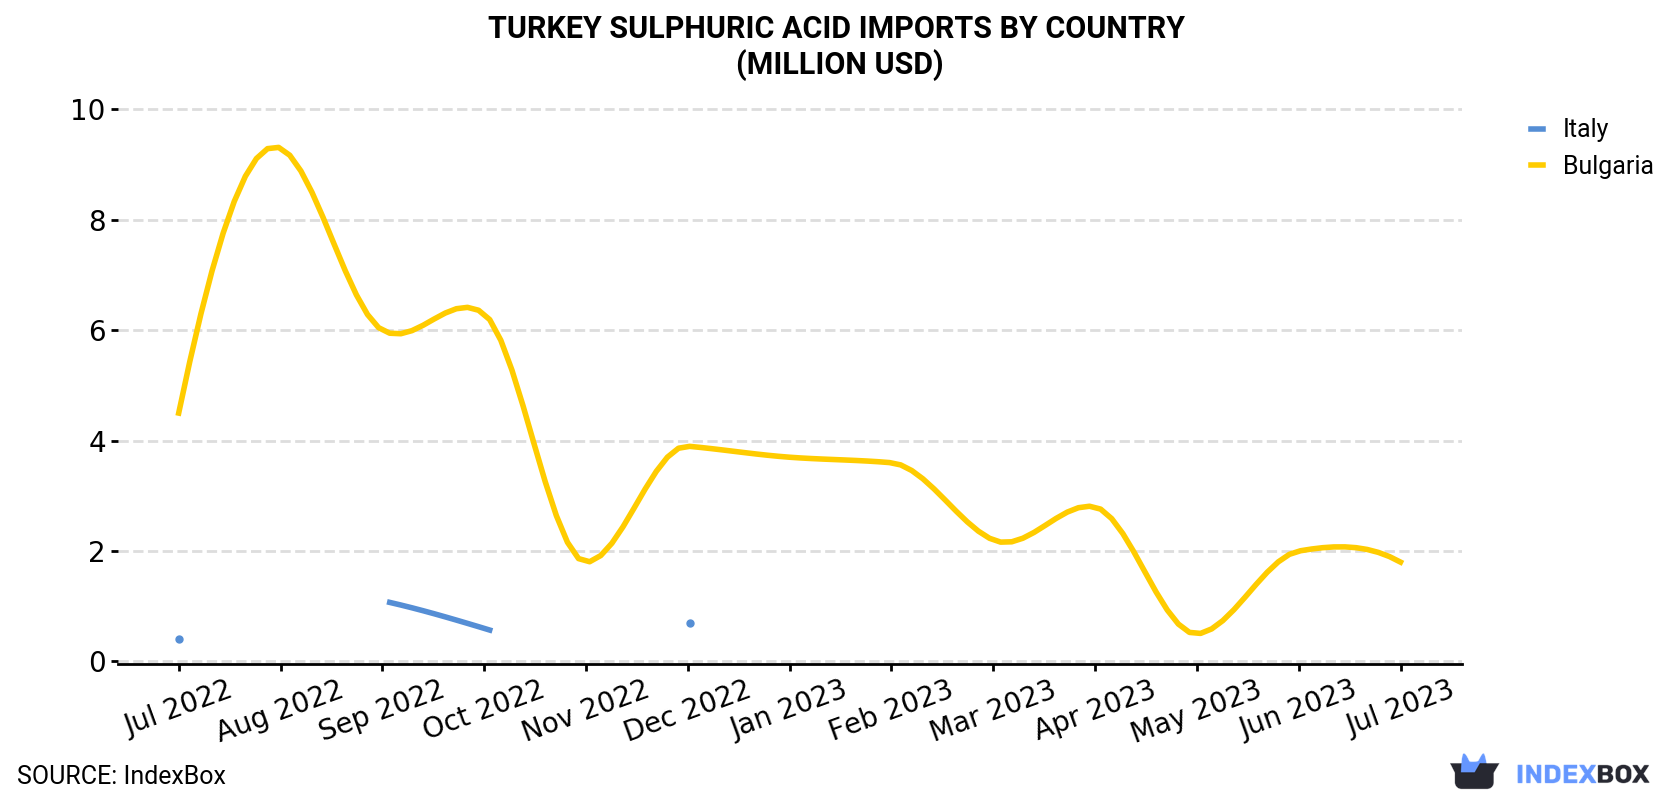 Turkey Sulphuric Acid Imports By Country (Million USD)